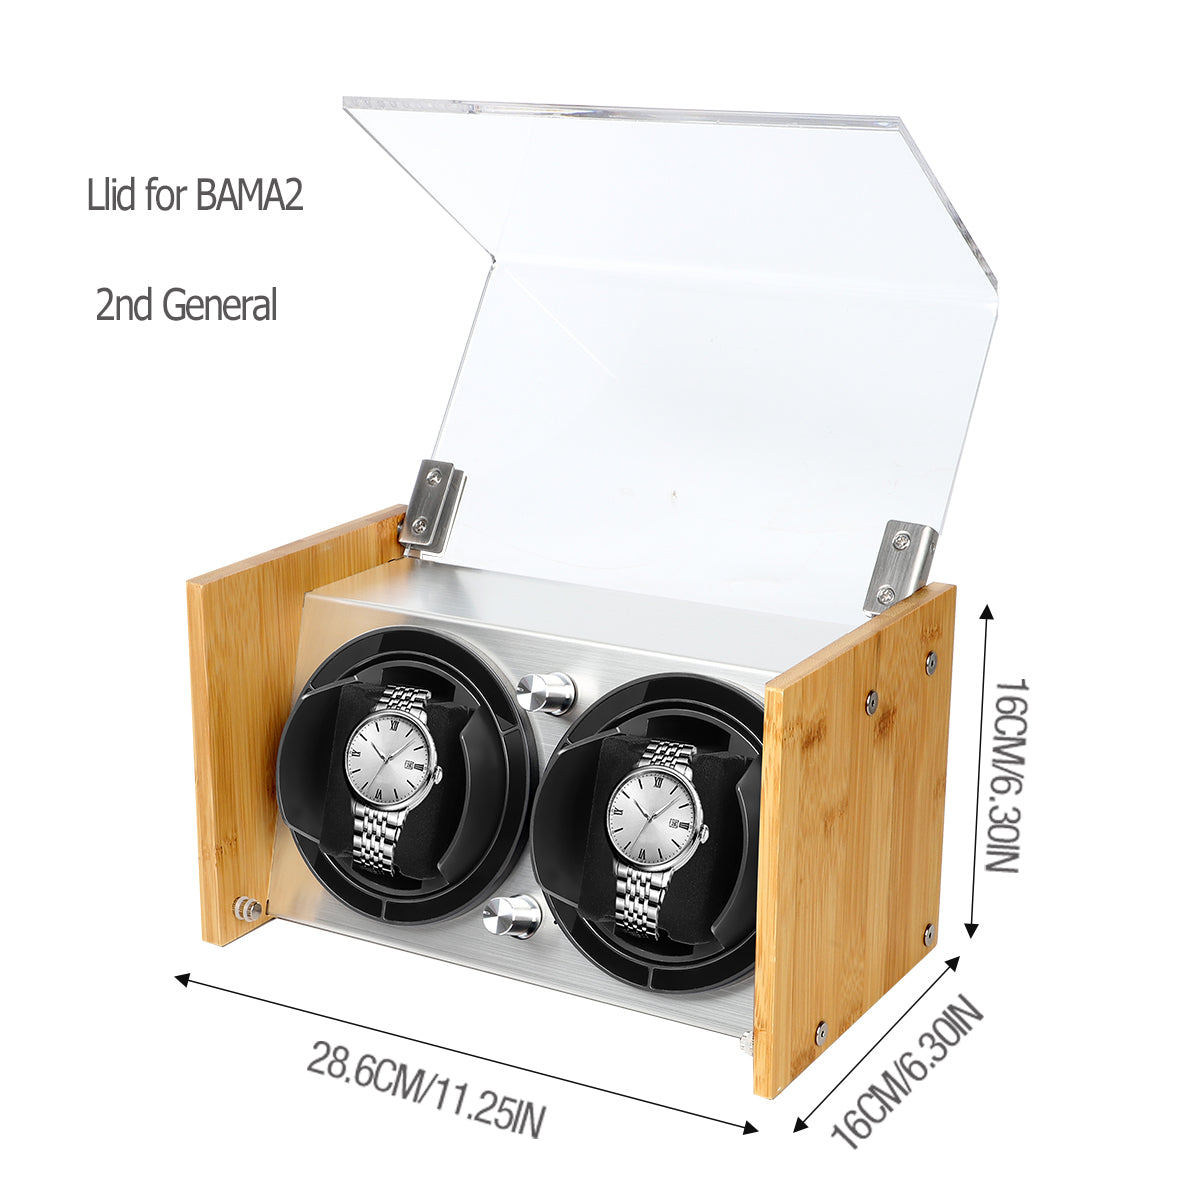 Acrylic Lid Only for Watch Winder Model BAMA2 2nd Generation